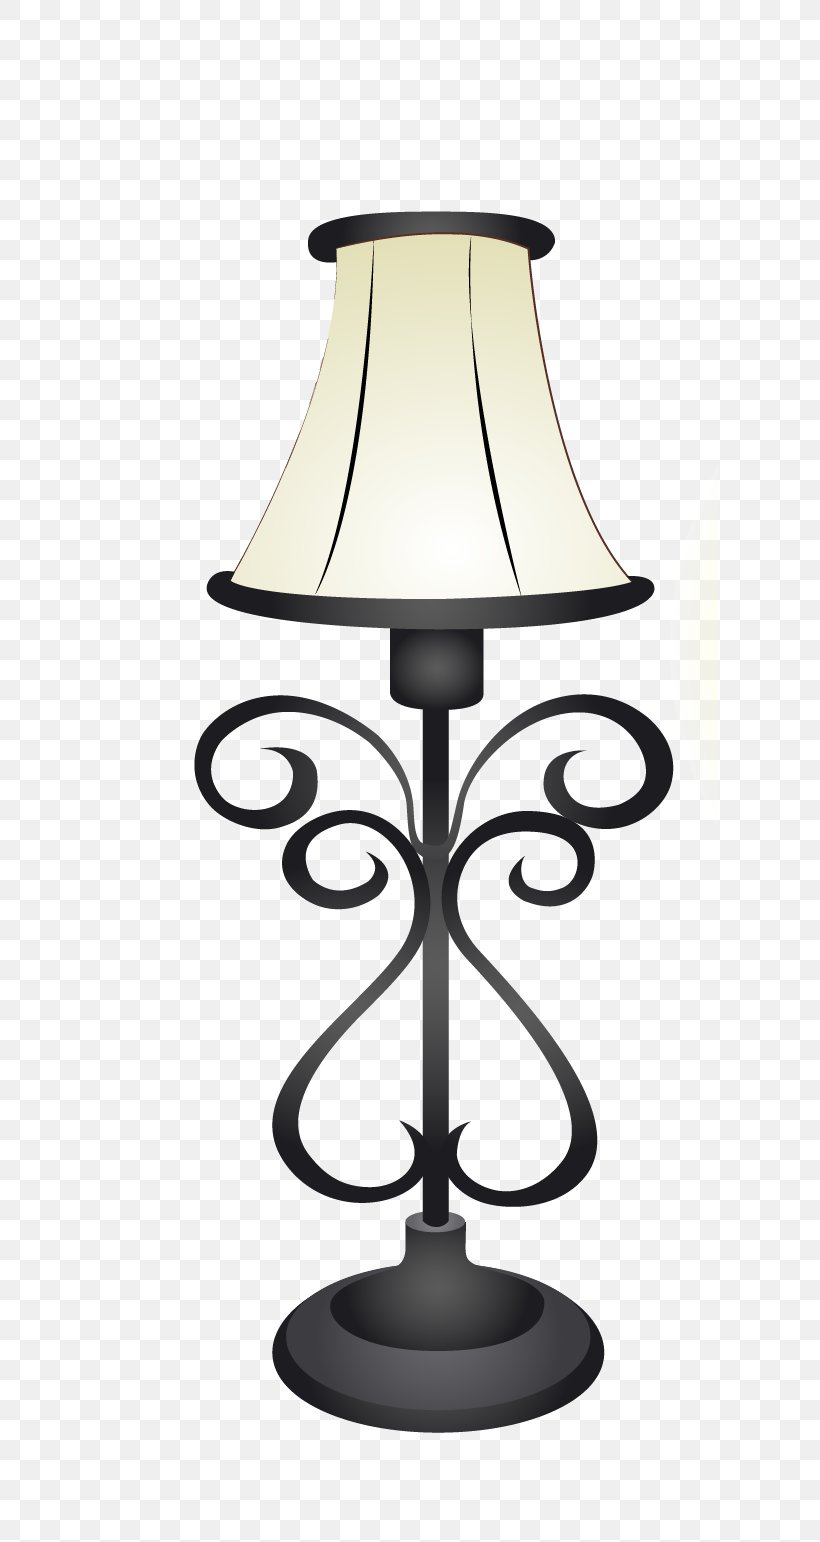 Lamp furniture light electric sketch Royalty Free Vector